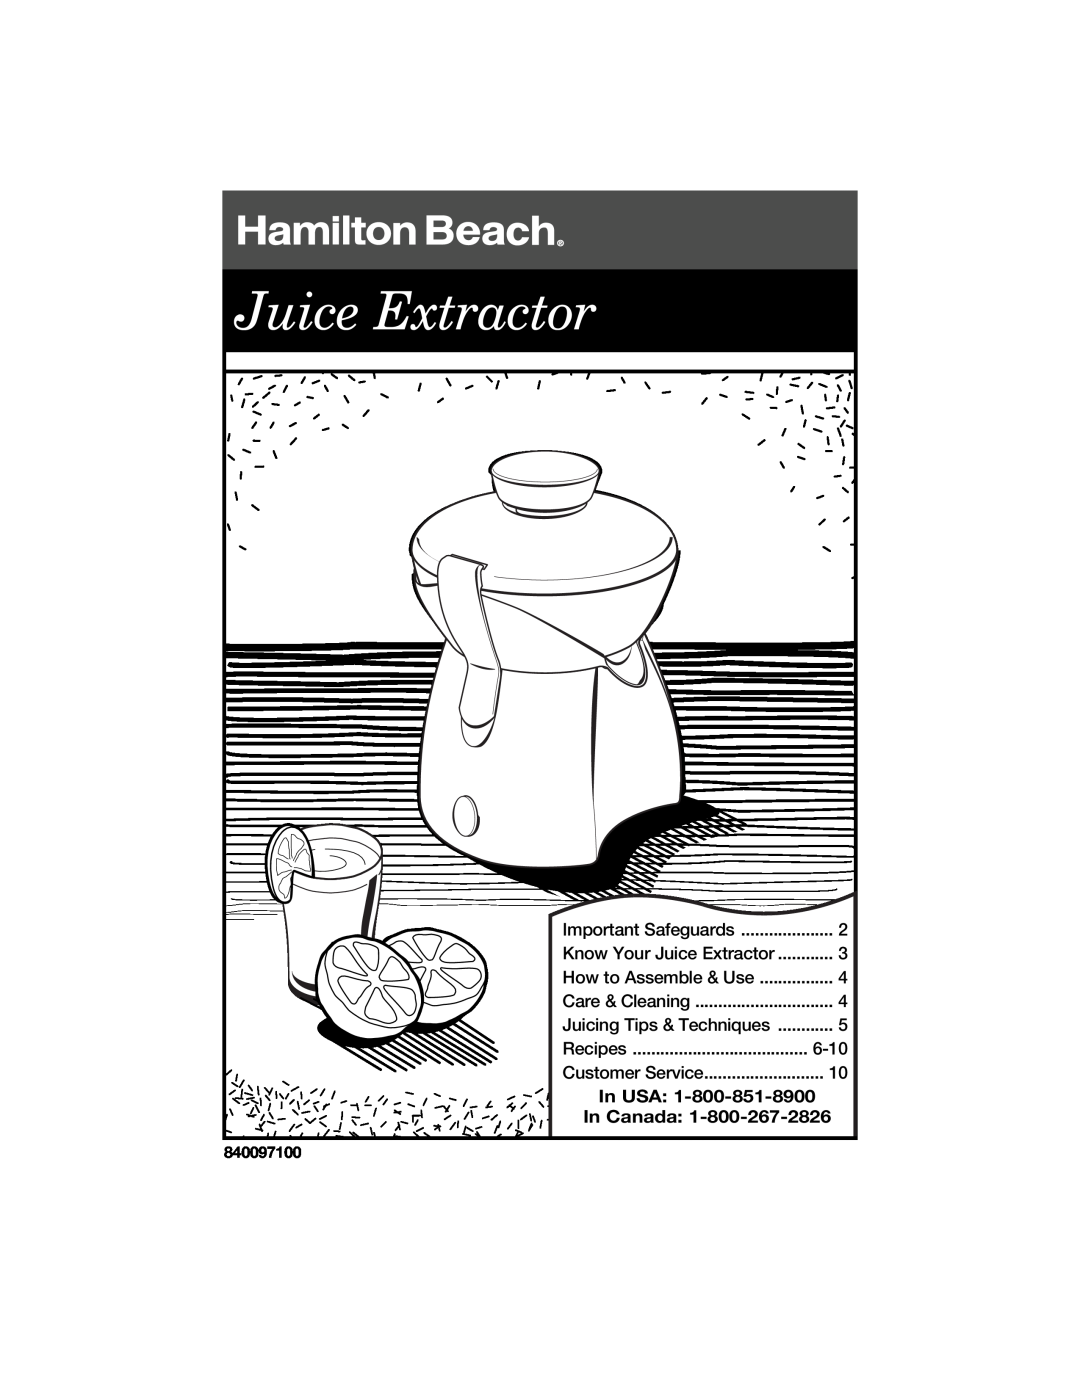 Hamilton Beach 840097100 manual Important Safeguards, Know Your Juice Extractor, How to Assemble & Use, Recipes 